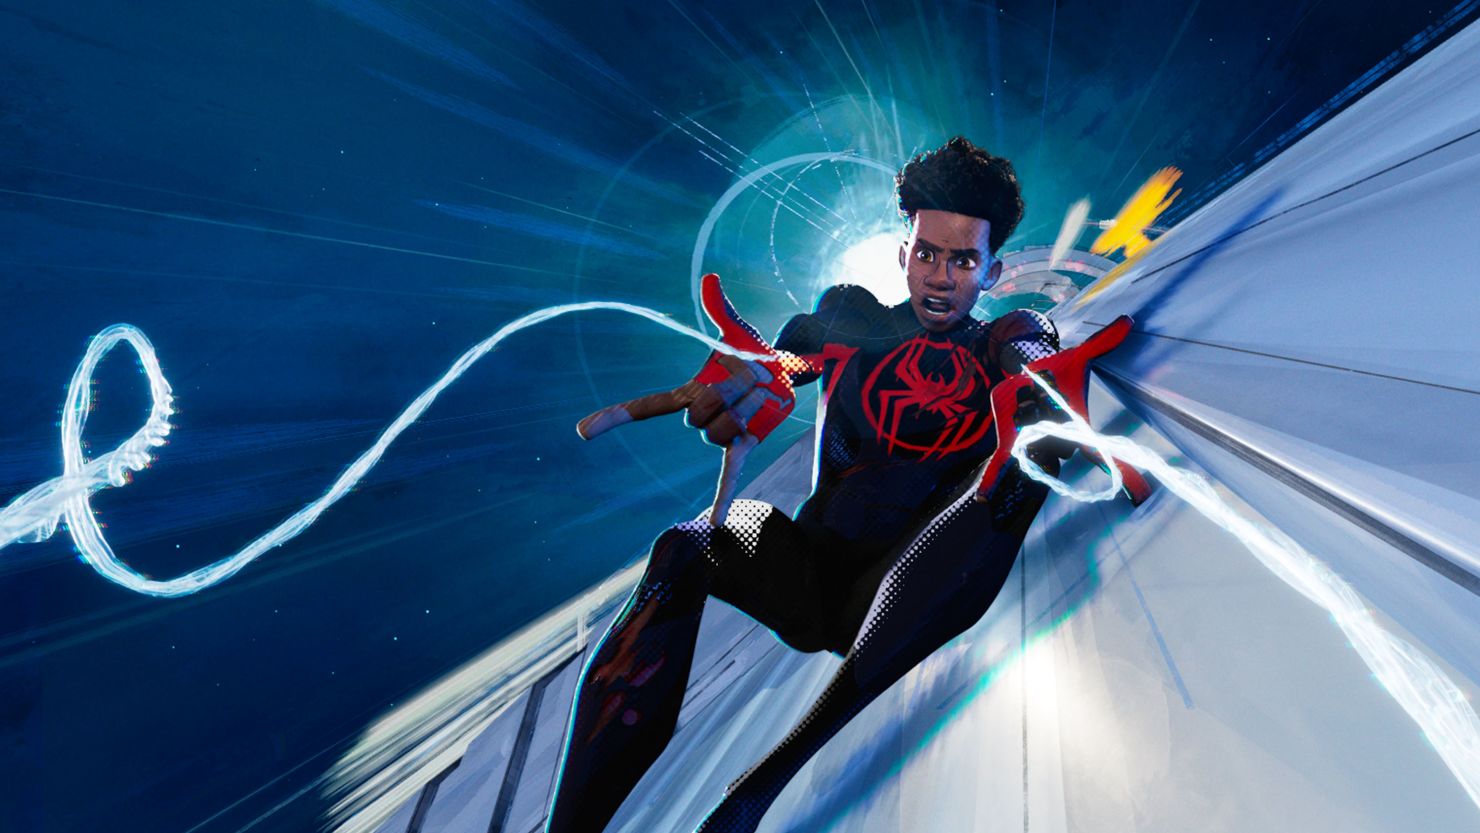 Spider-Man/Miles Morales (voiced by Shameik Moore) in "Spider-Man: Across the Spider-Verse."